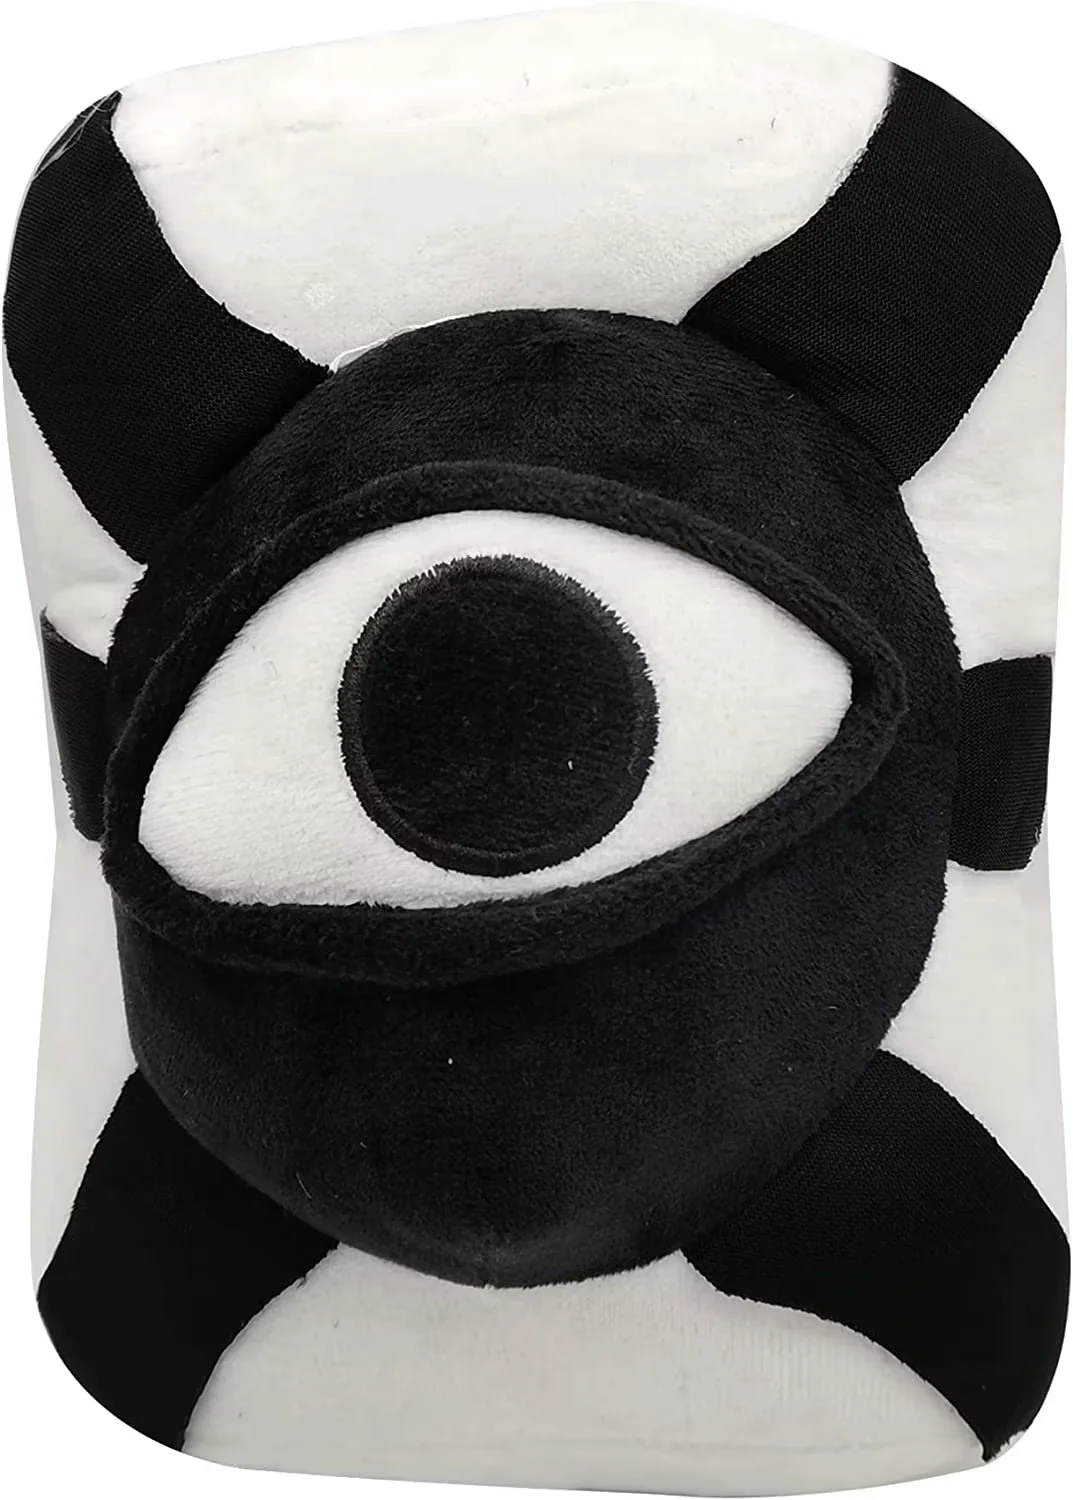 Vadkind 2022 Monster Horror Game Doors Plush, 7.1 The Rush Plushies Toy  for Fans Gift, Soft Stuffed Figure Doll for Kids and Adults